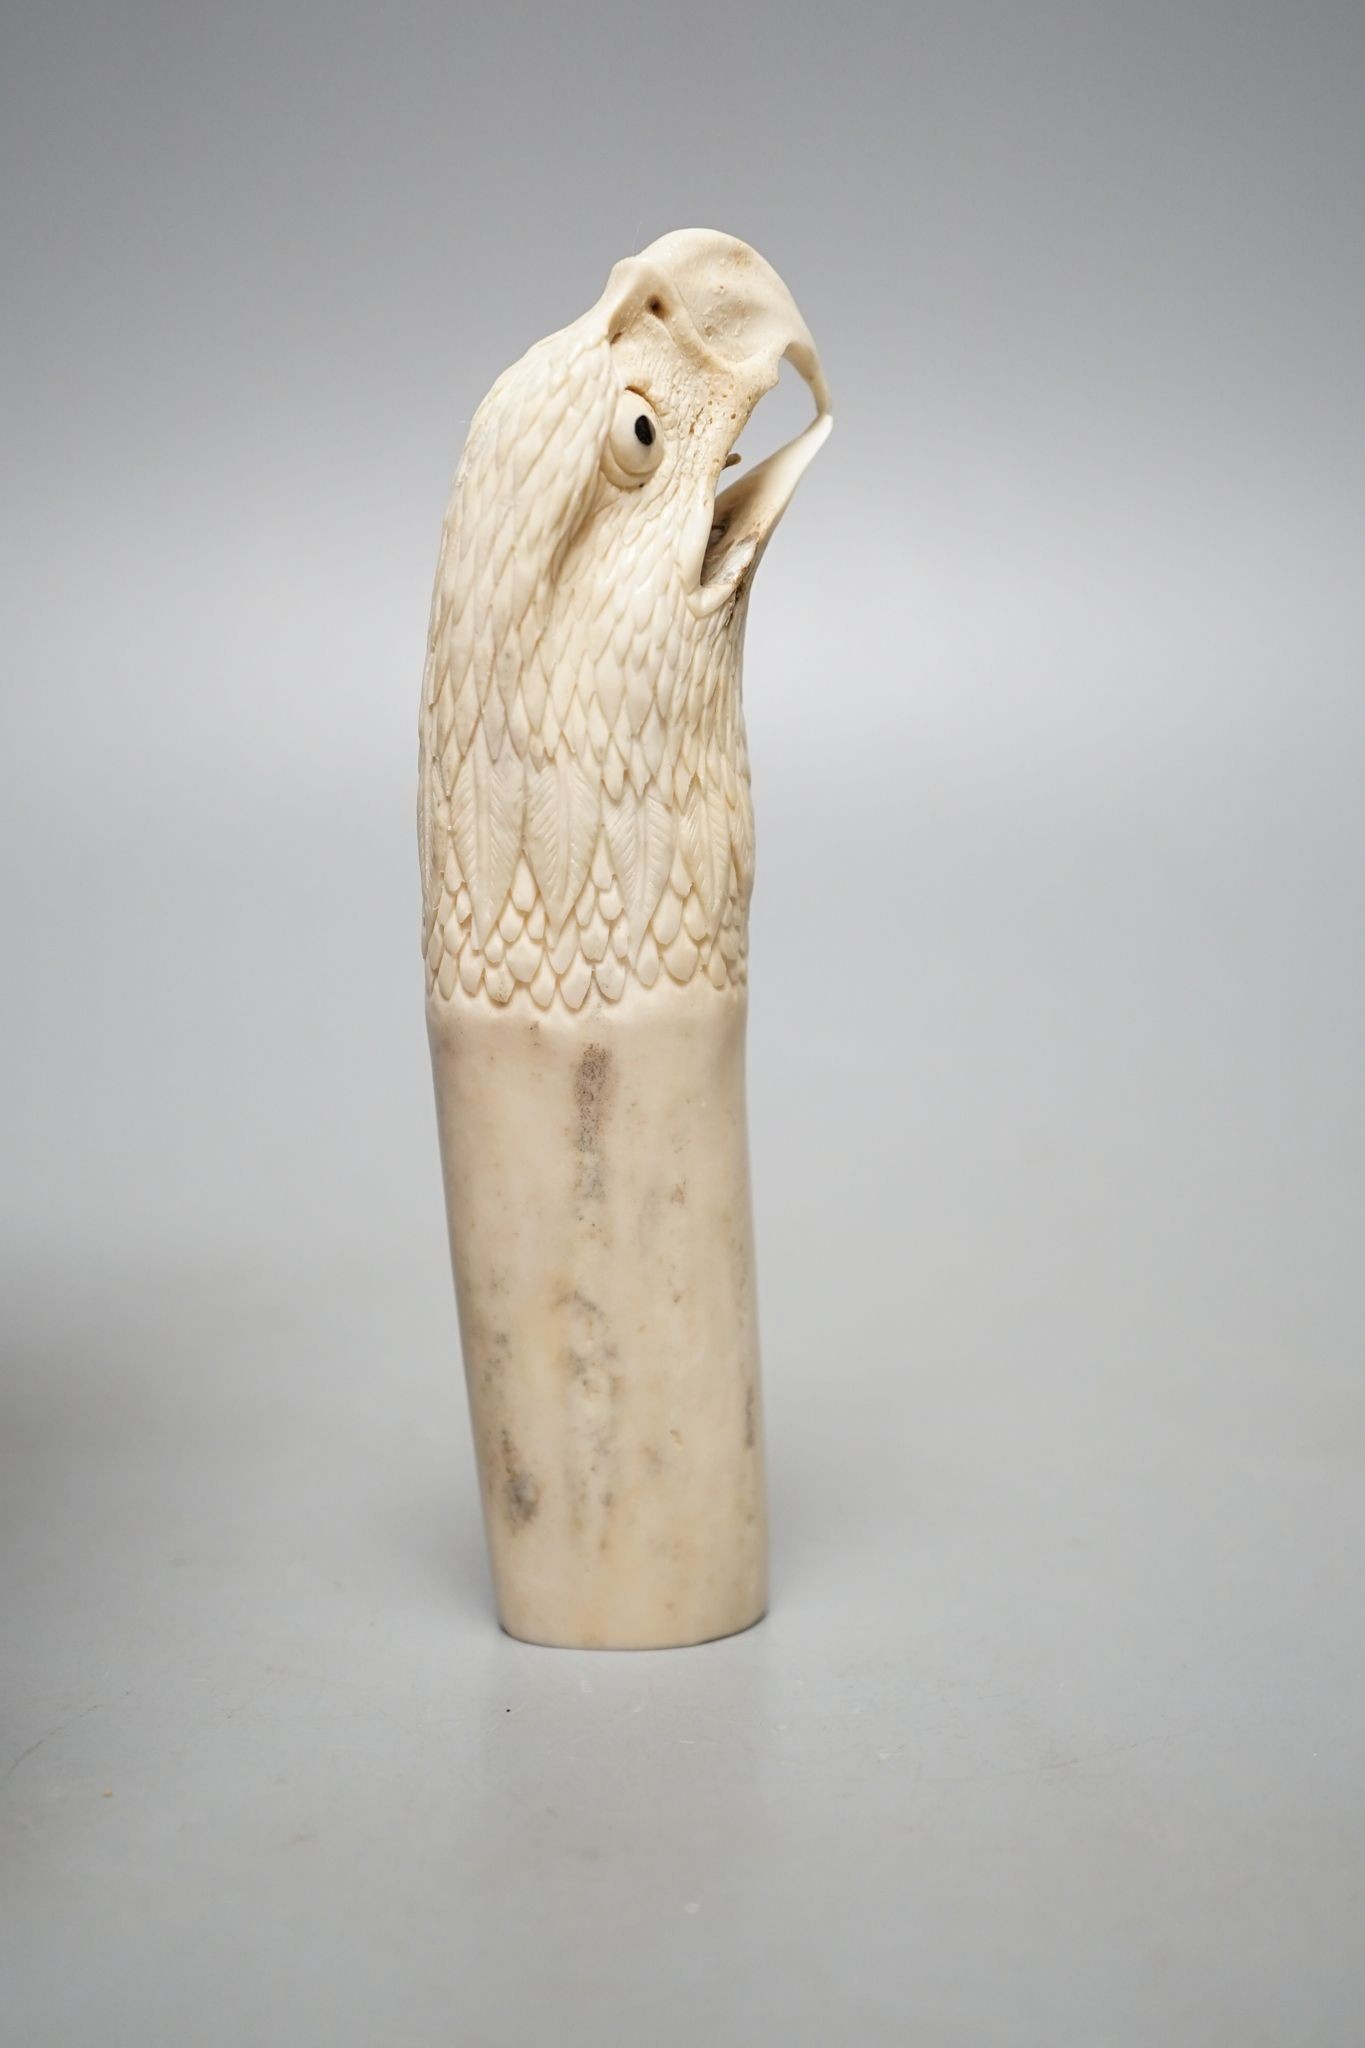 Two Japanese stag horn handles - eagle's head and a memento mori, eagle-head 13.5 cms high.